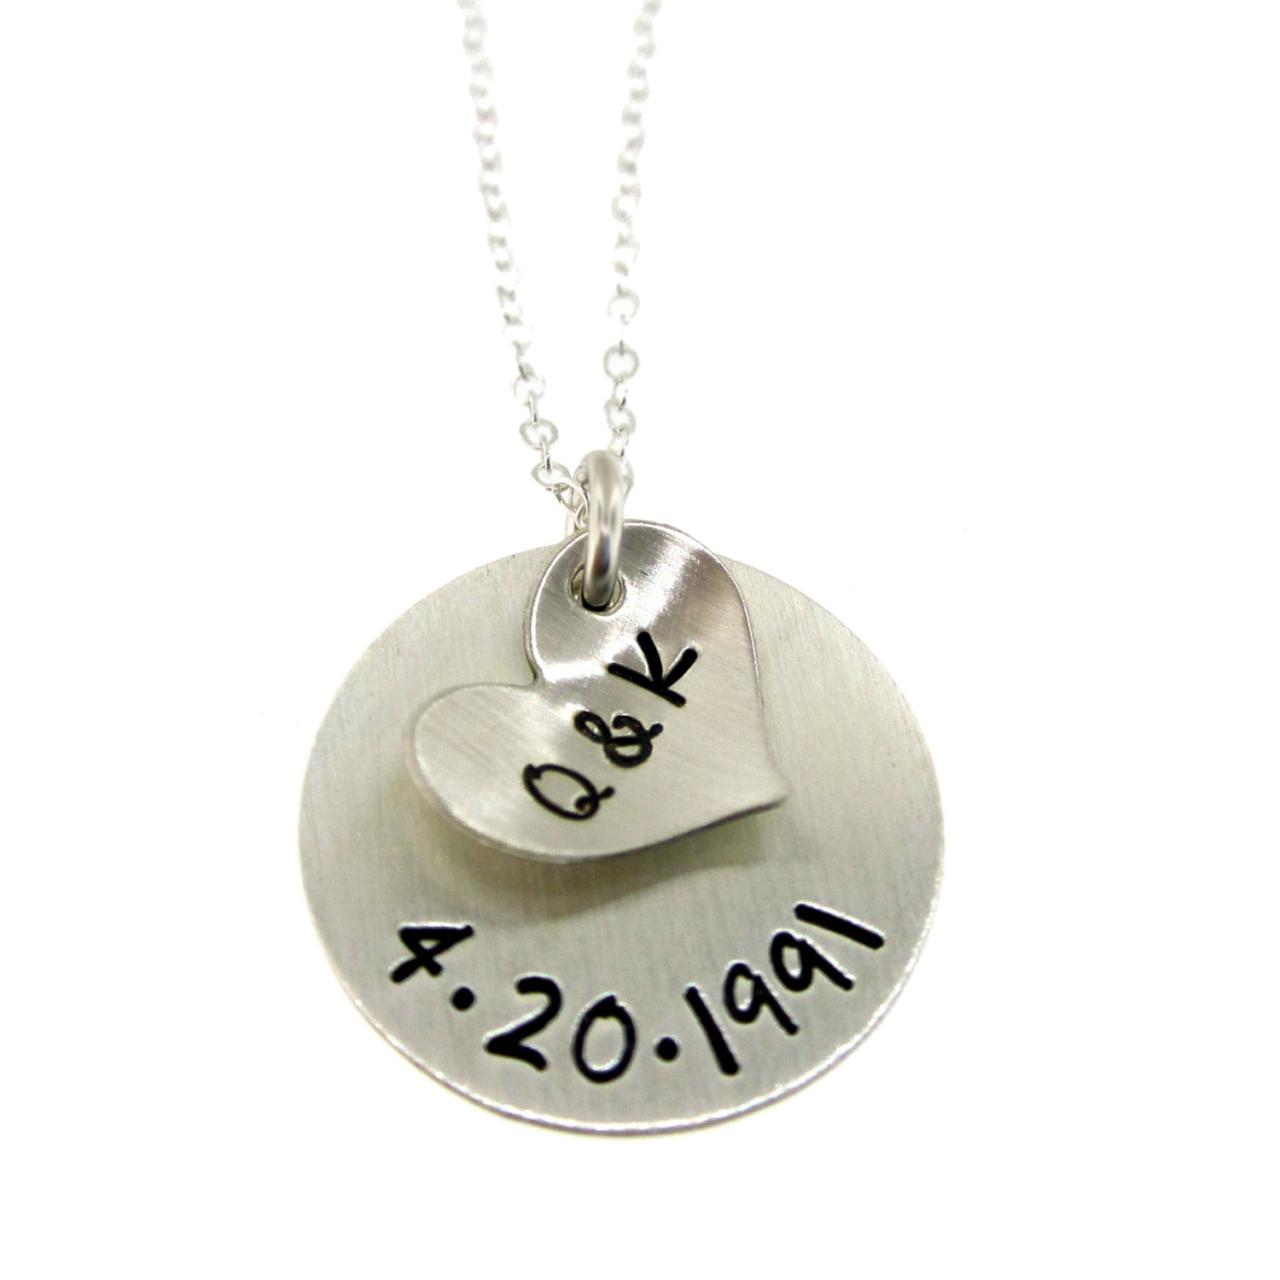 Our Initials And Anniversary Date - Hand Stamped Necklace